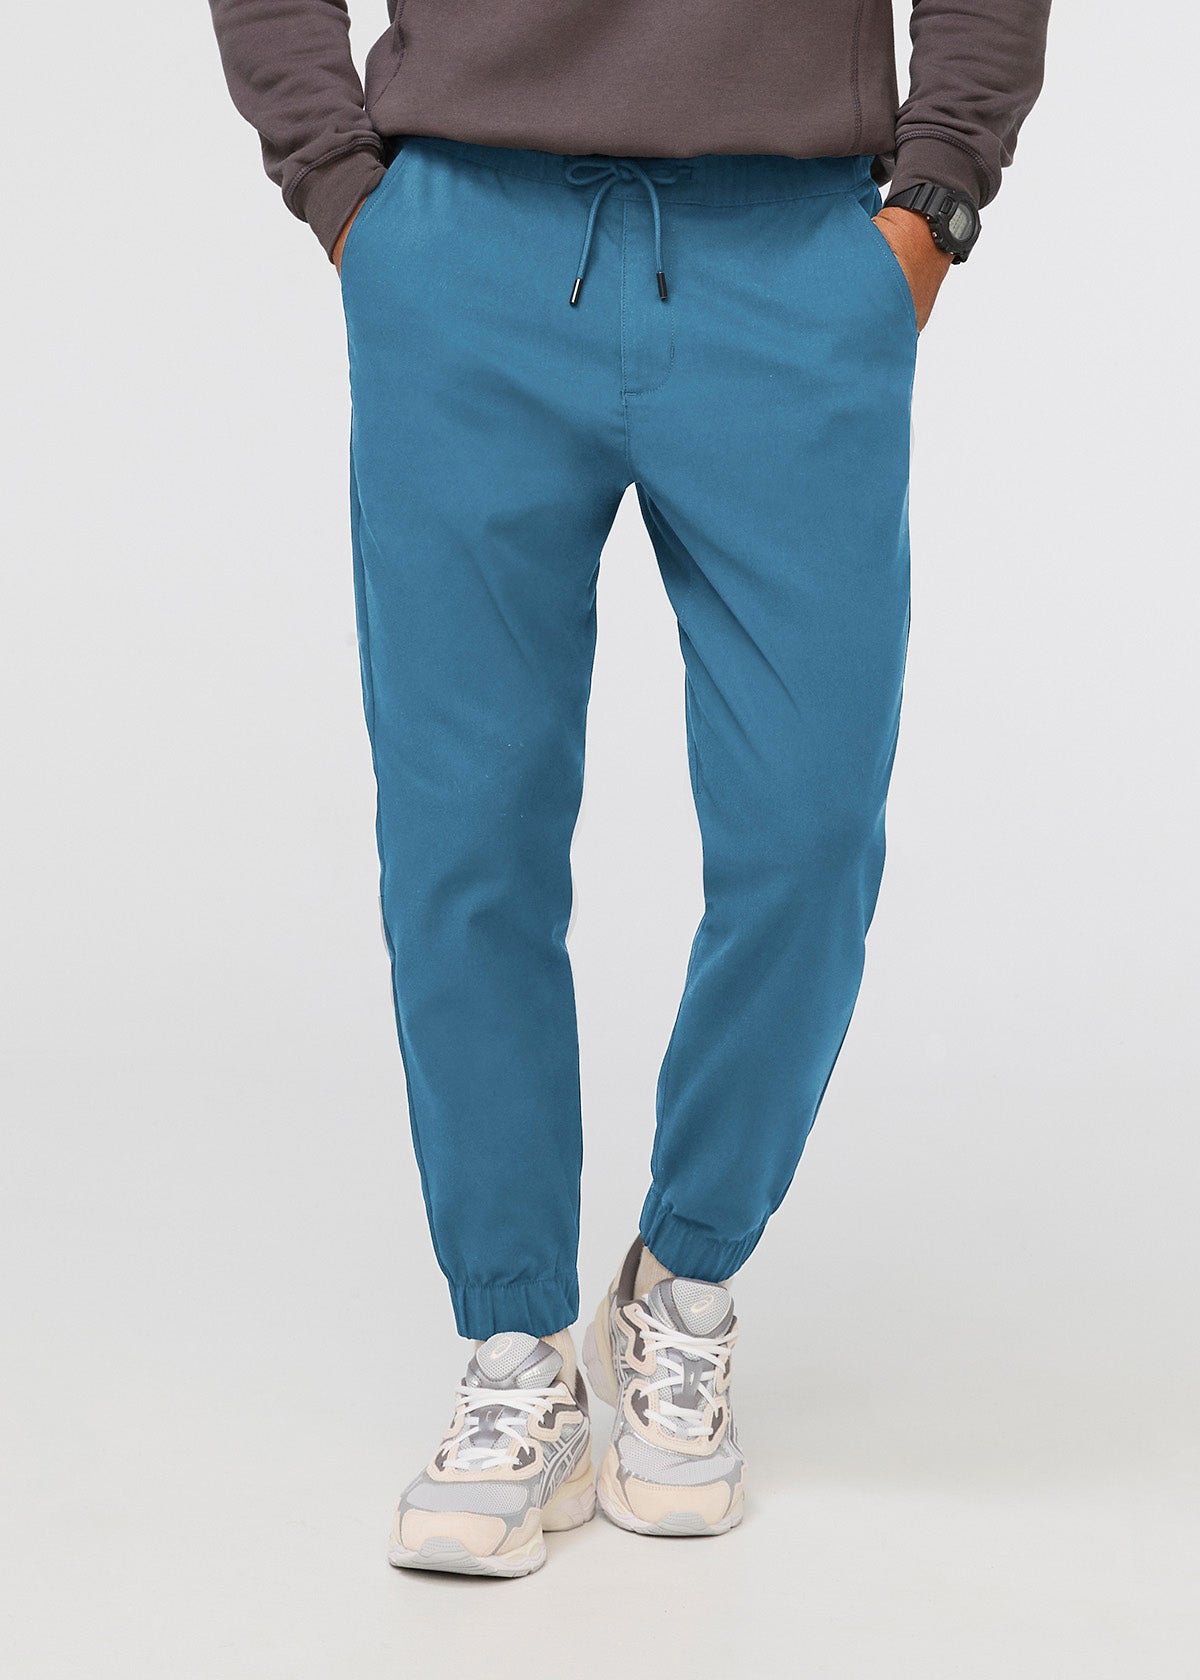 Men's Stretch Pants - Performance by DUER